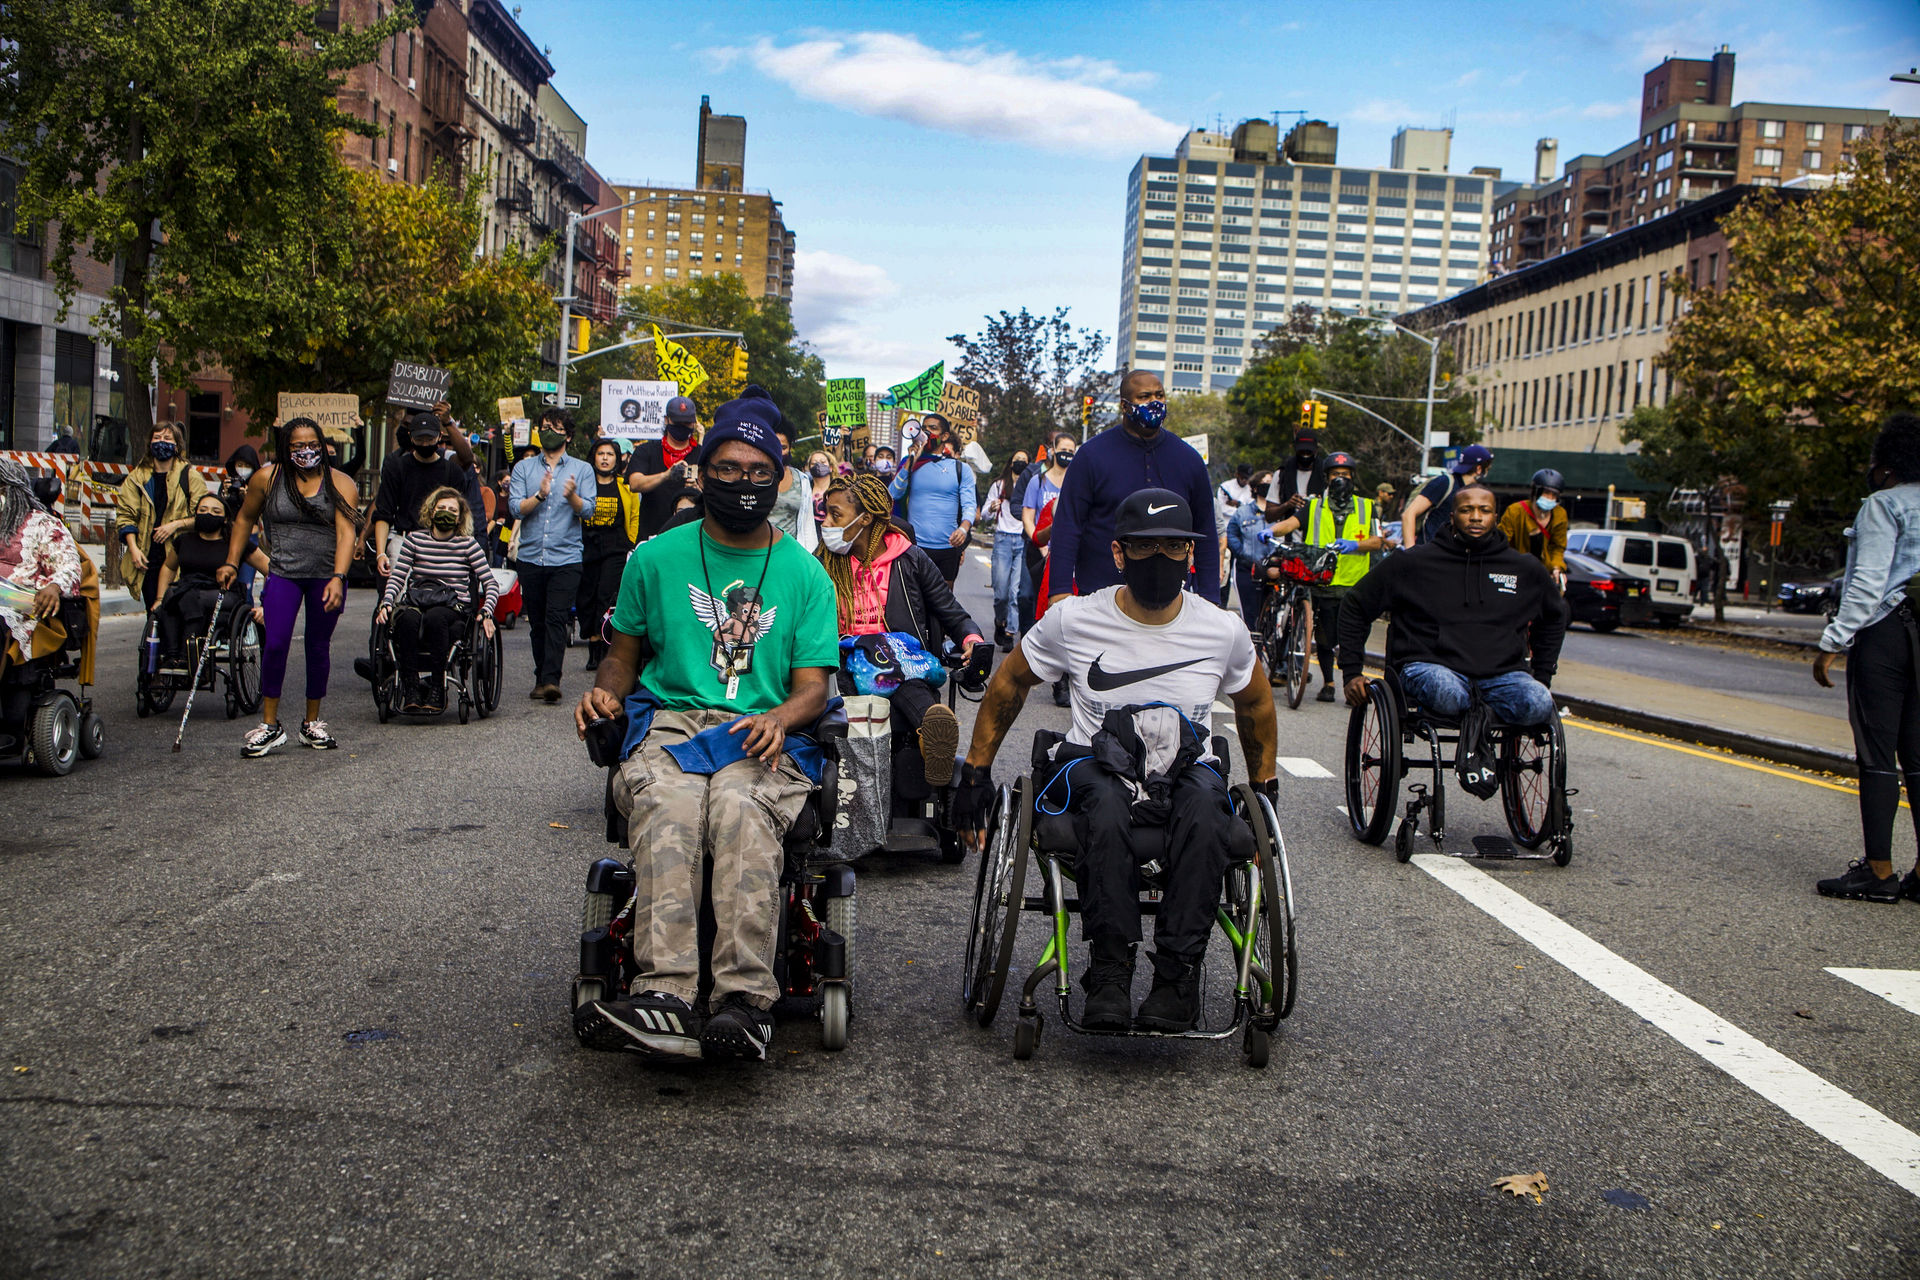 Two men in wheelchairs wearing masks lead a crowd of people, some in wheelchairs or with canes, some holding posters.